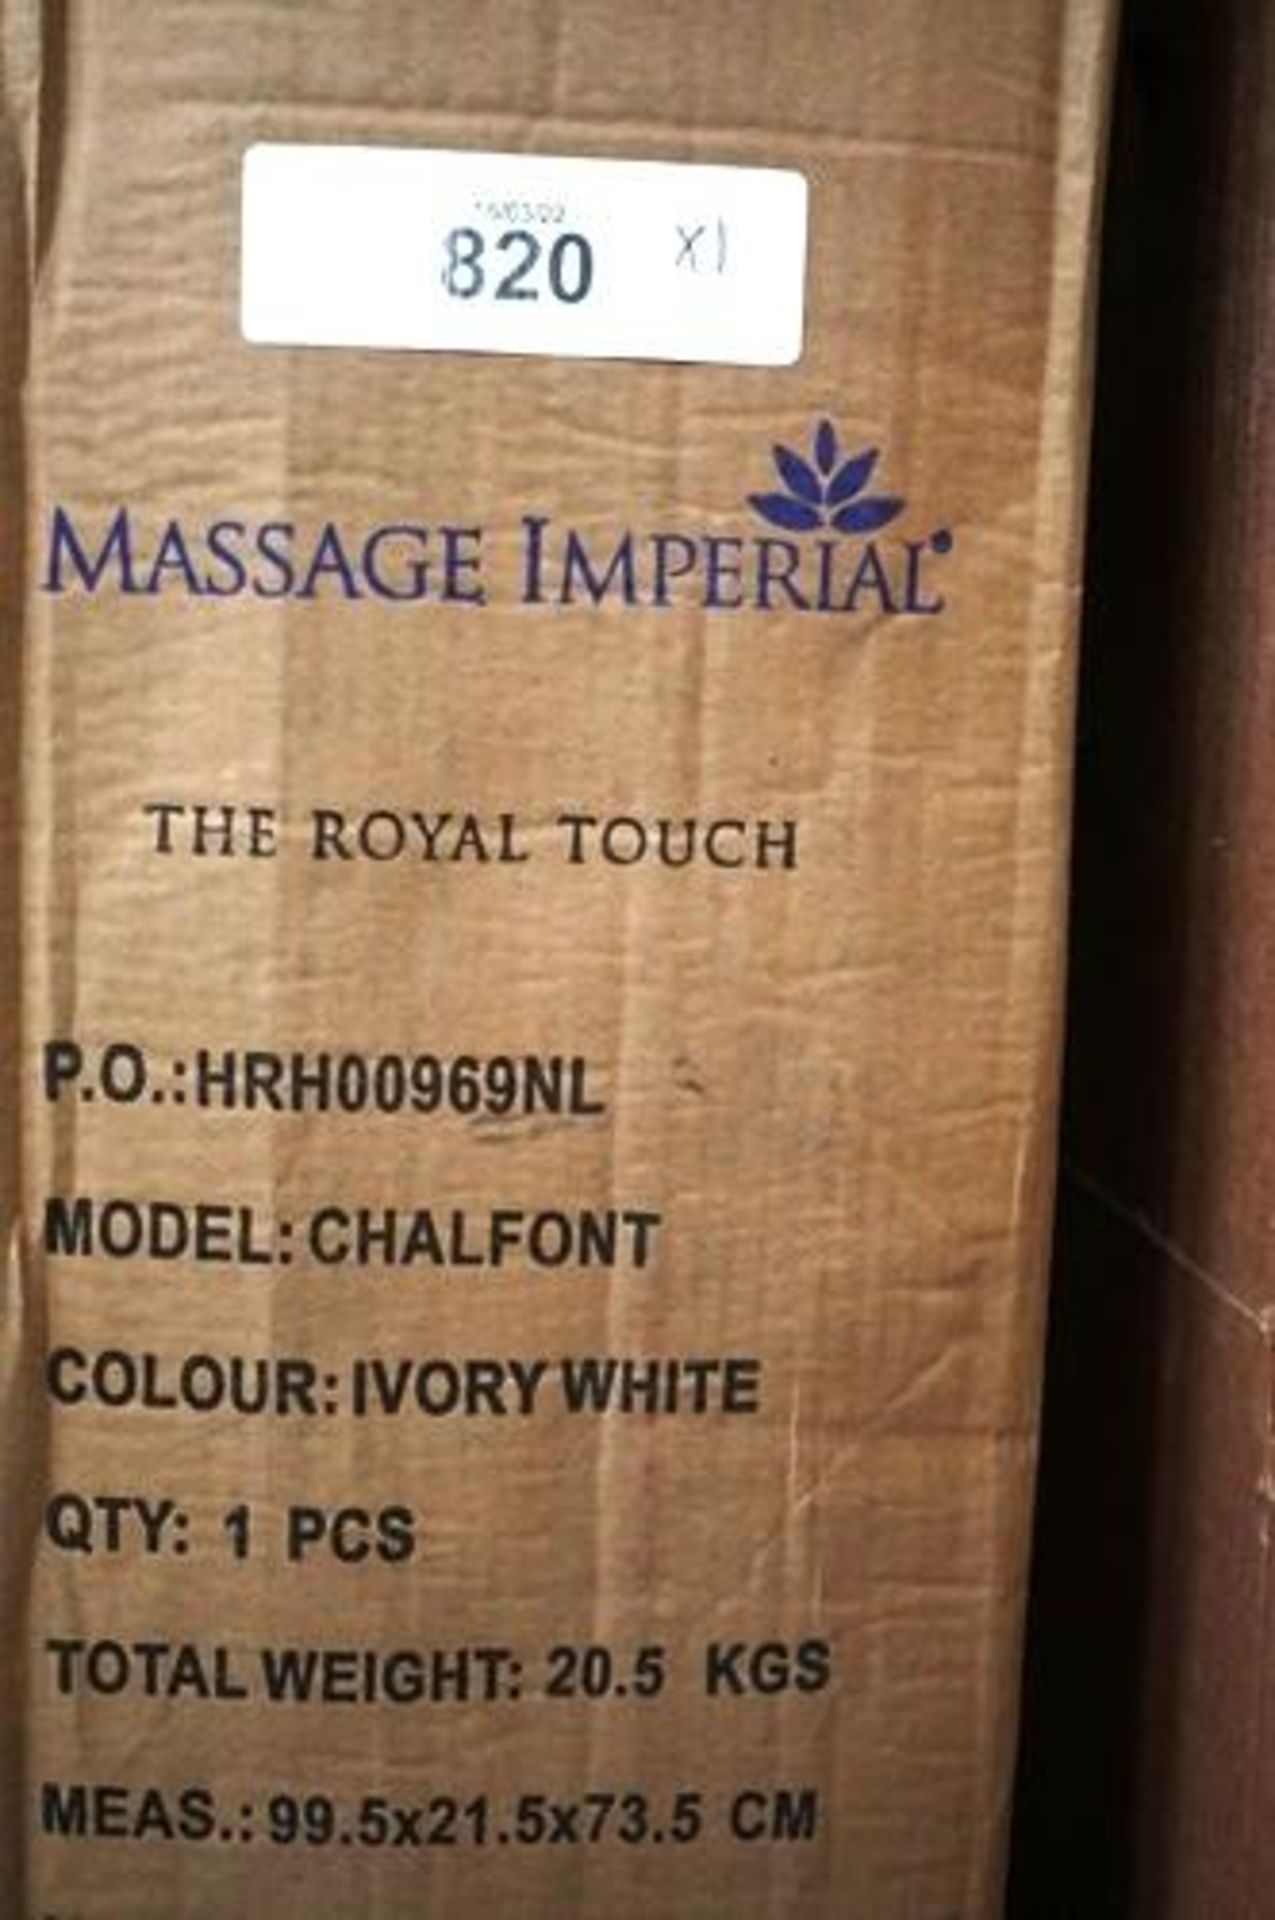 1 x Massage Imperial Chalfont ivory white, The Royal Touch massage table. -new- (GS31B).